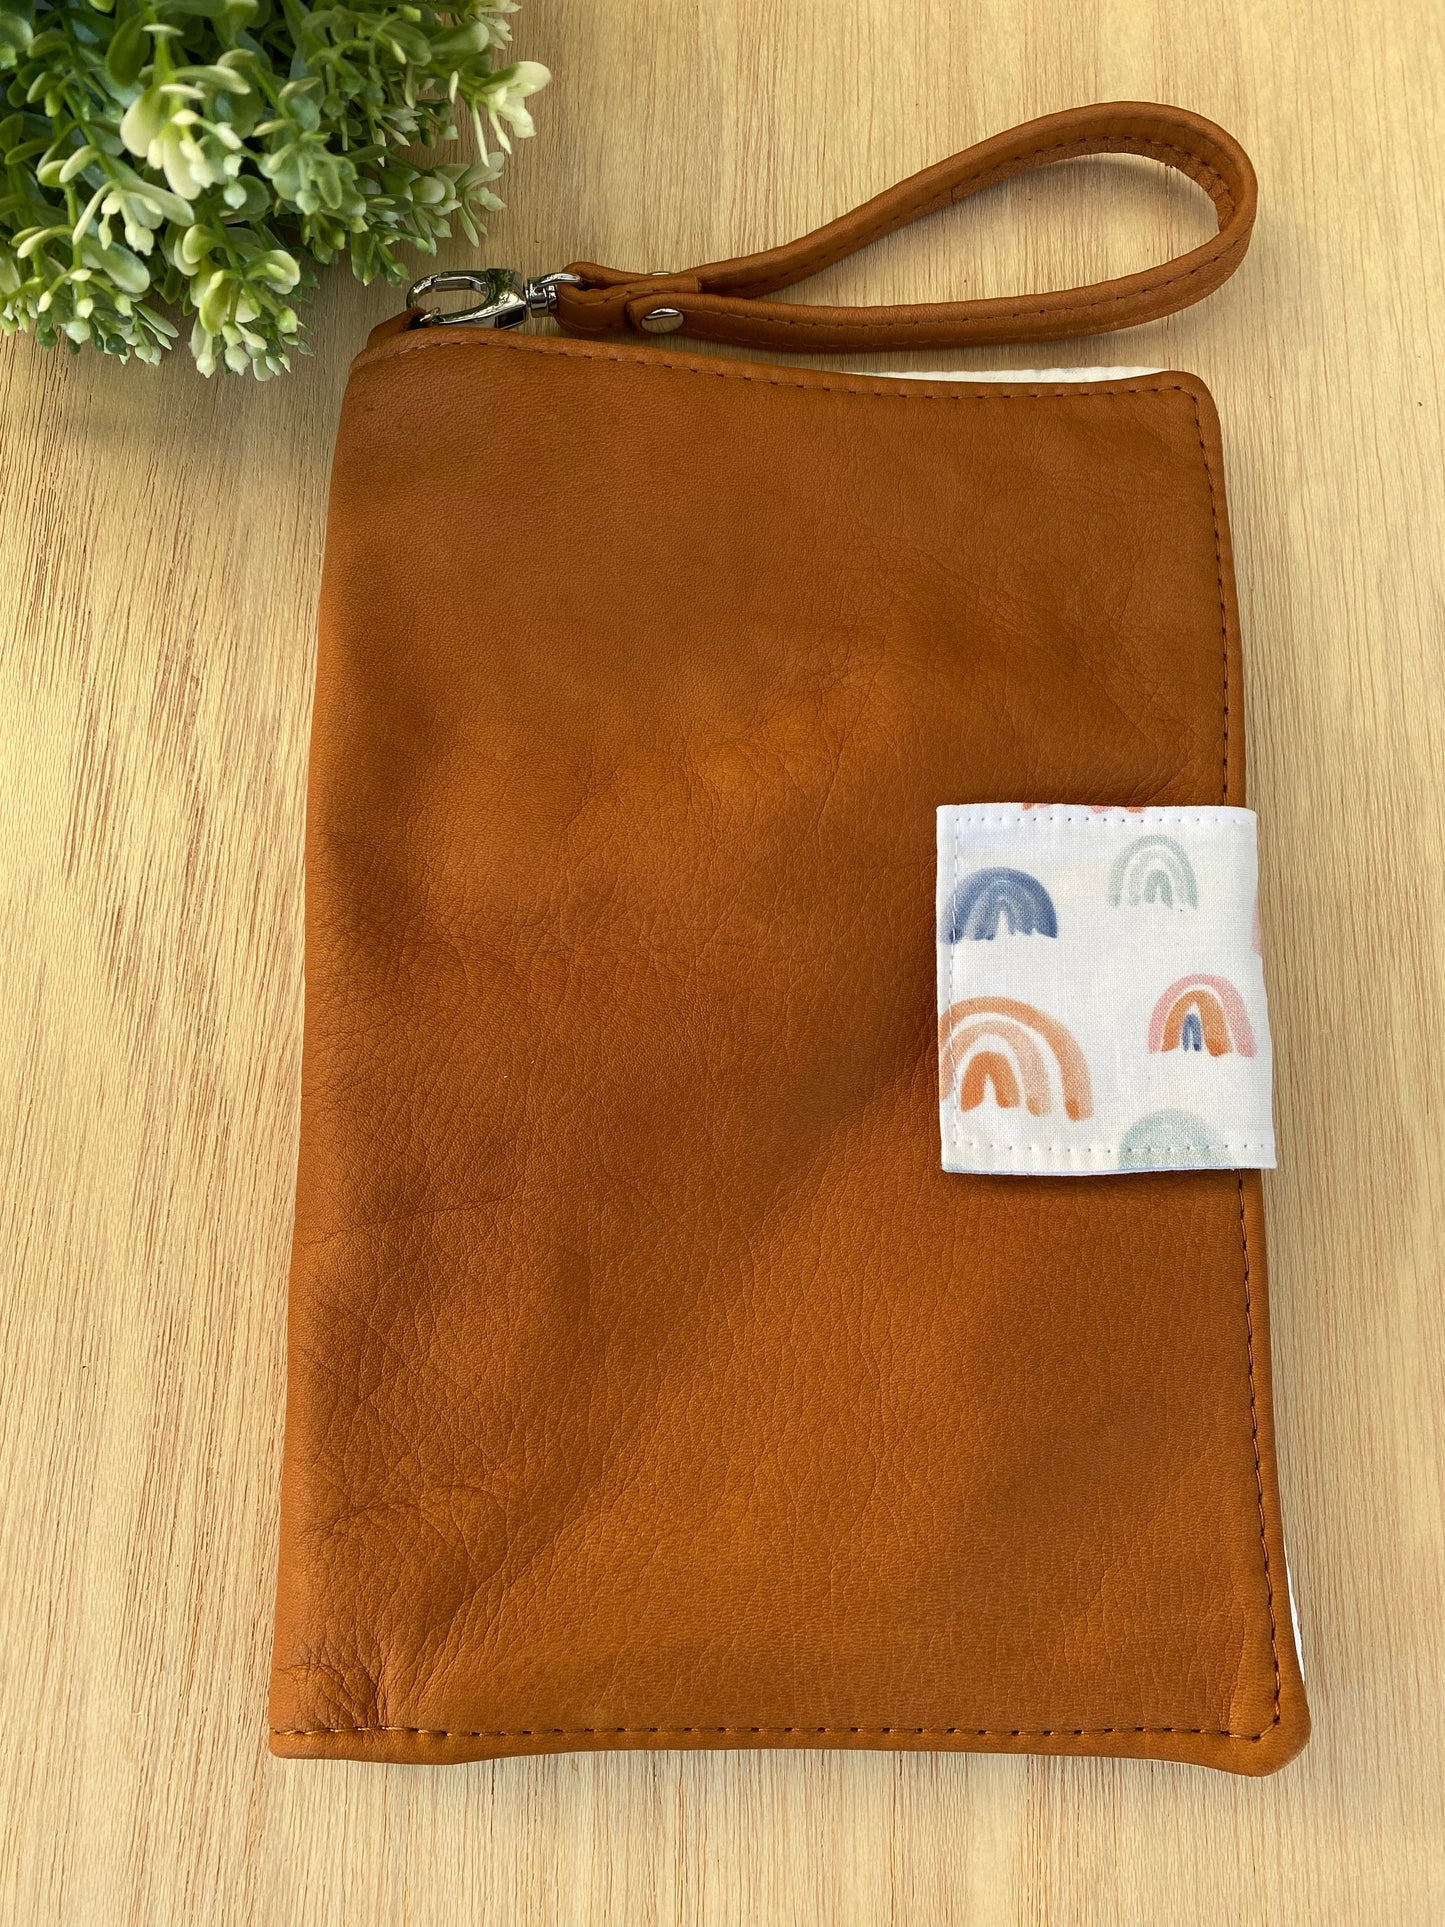 Leather nappy wallet - Watercolour rainbow on tan leather